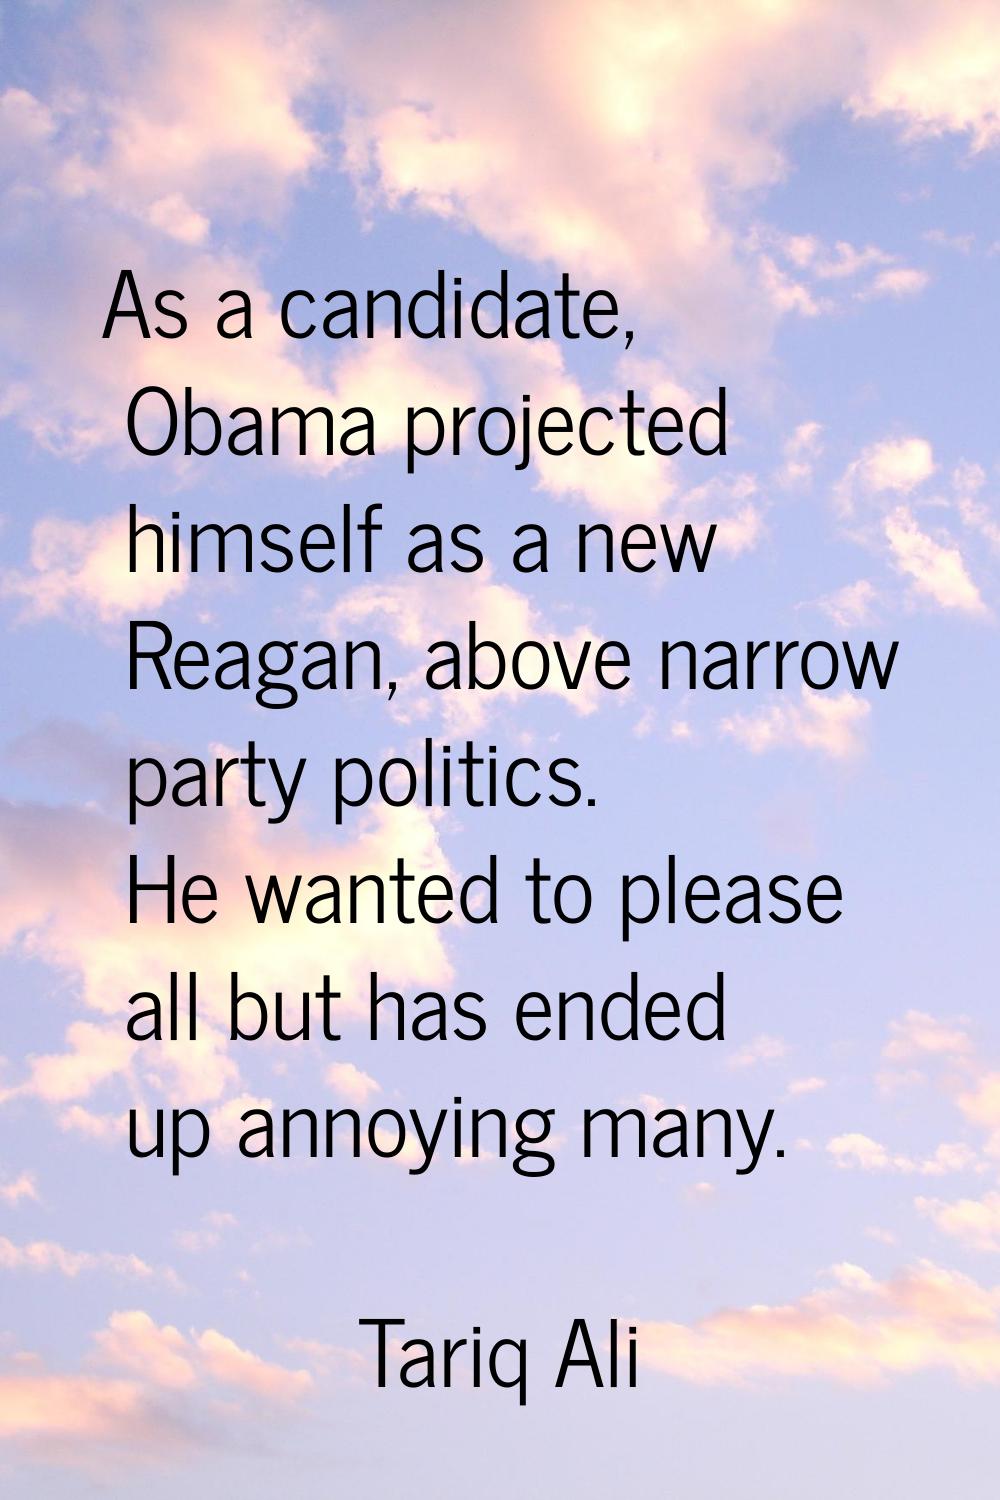 As a candidate, Obama projected himself as a new Reagan, above narrow party politics. He wanted to 